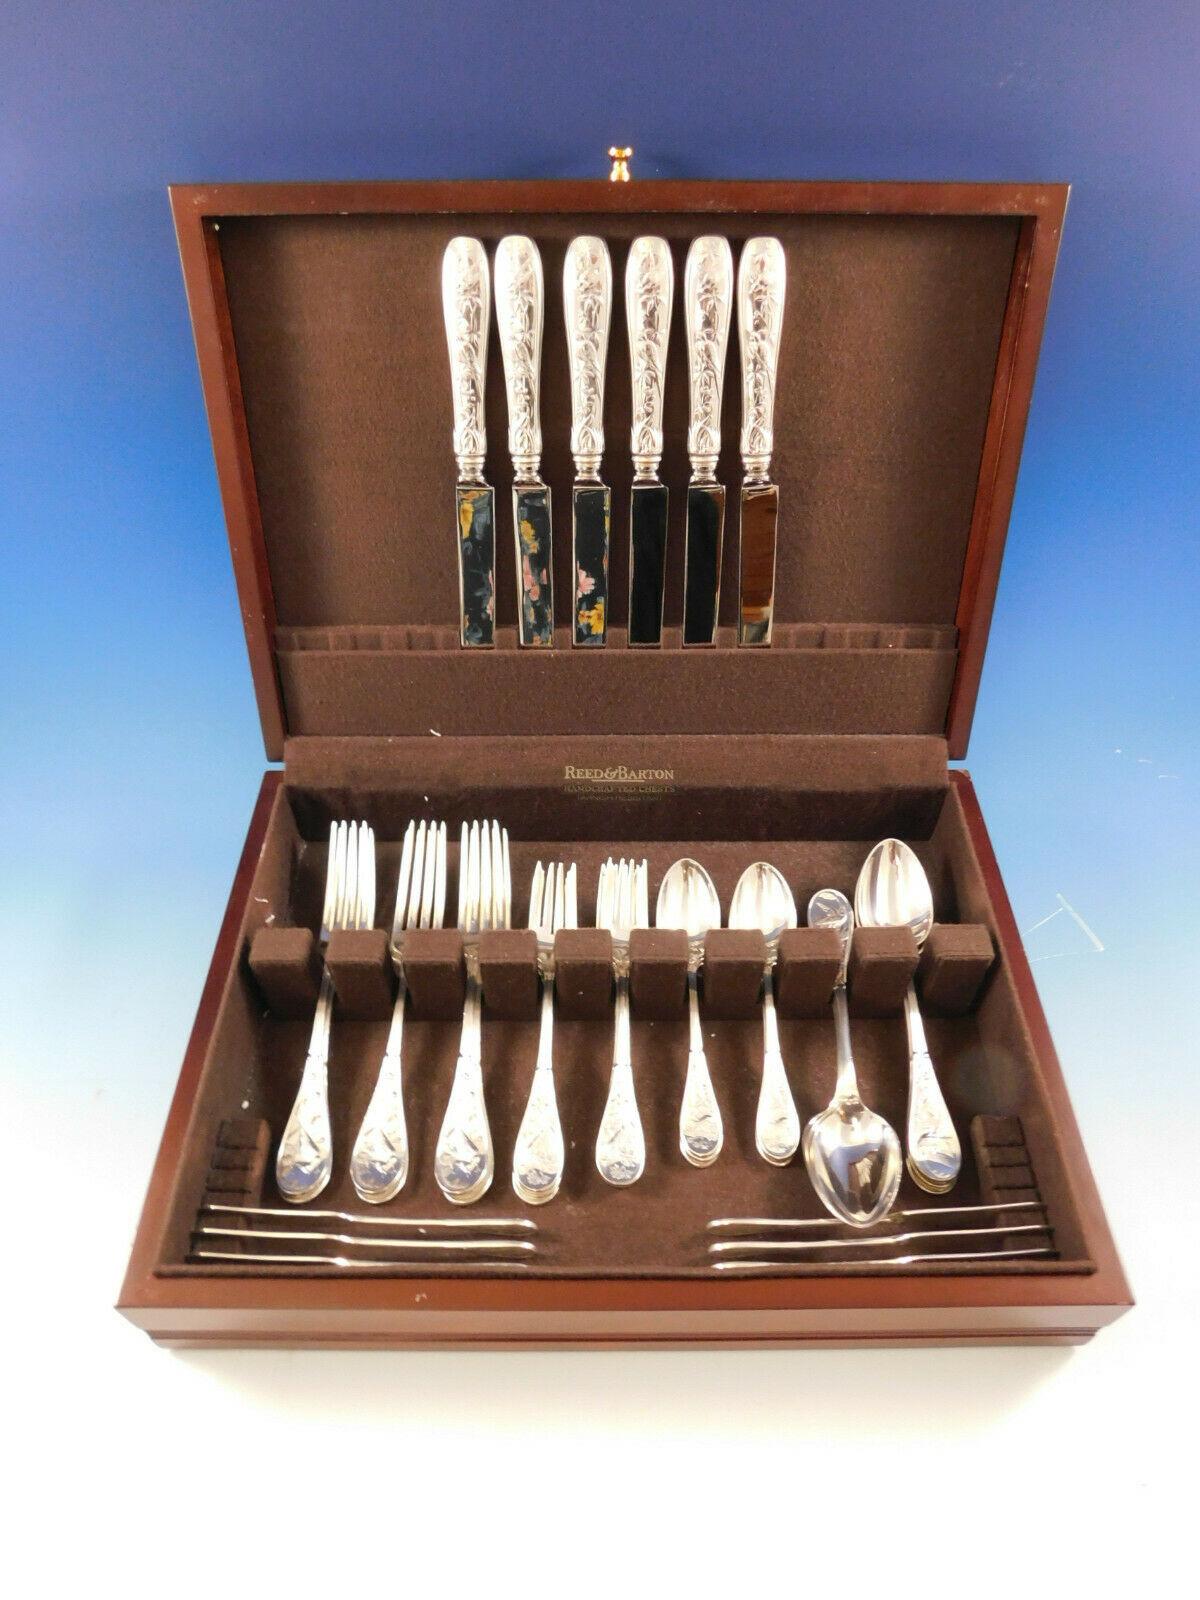 Dinner size Audubon by Tiffany & Co. sterling silver flatware set, 36 pieces. Great starter set! This set includes:

6 dinner size knives, 10 1/8